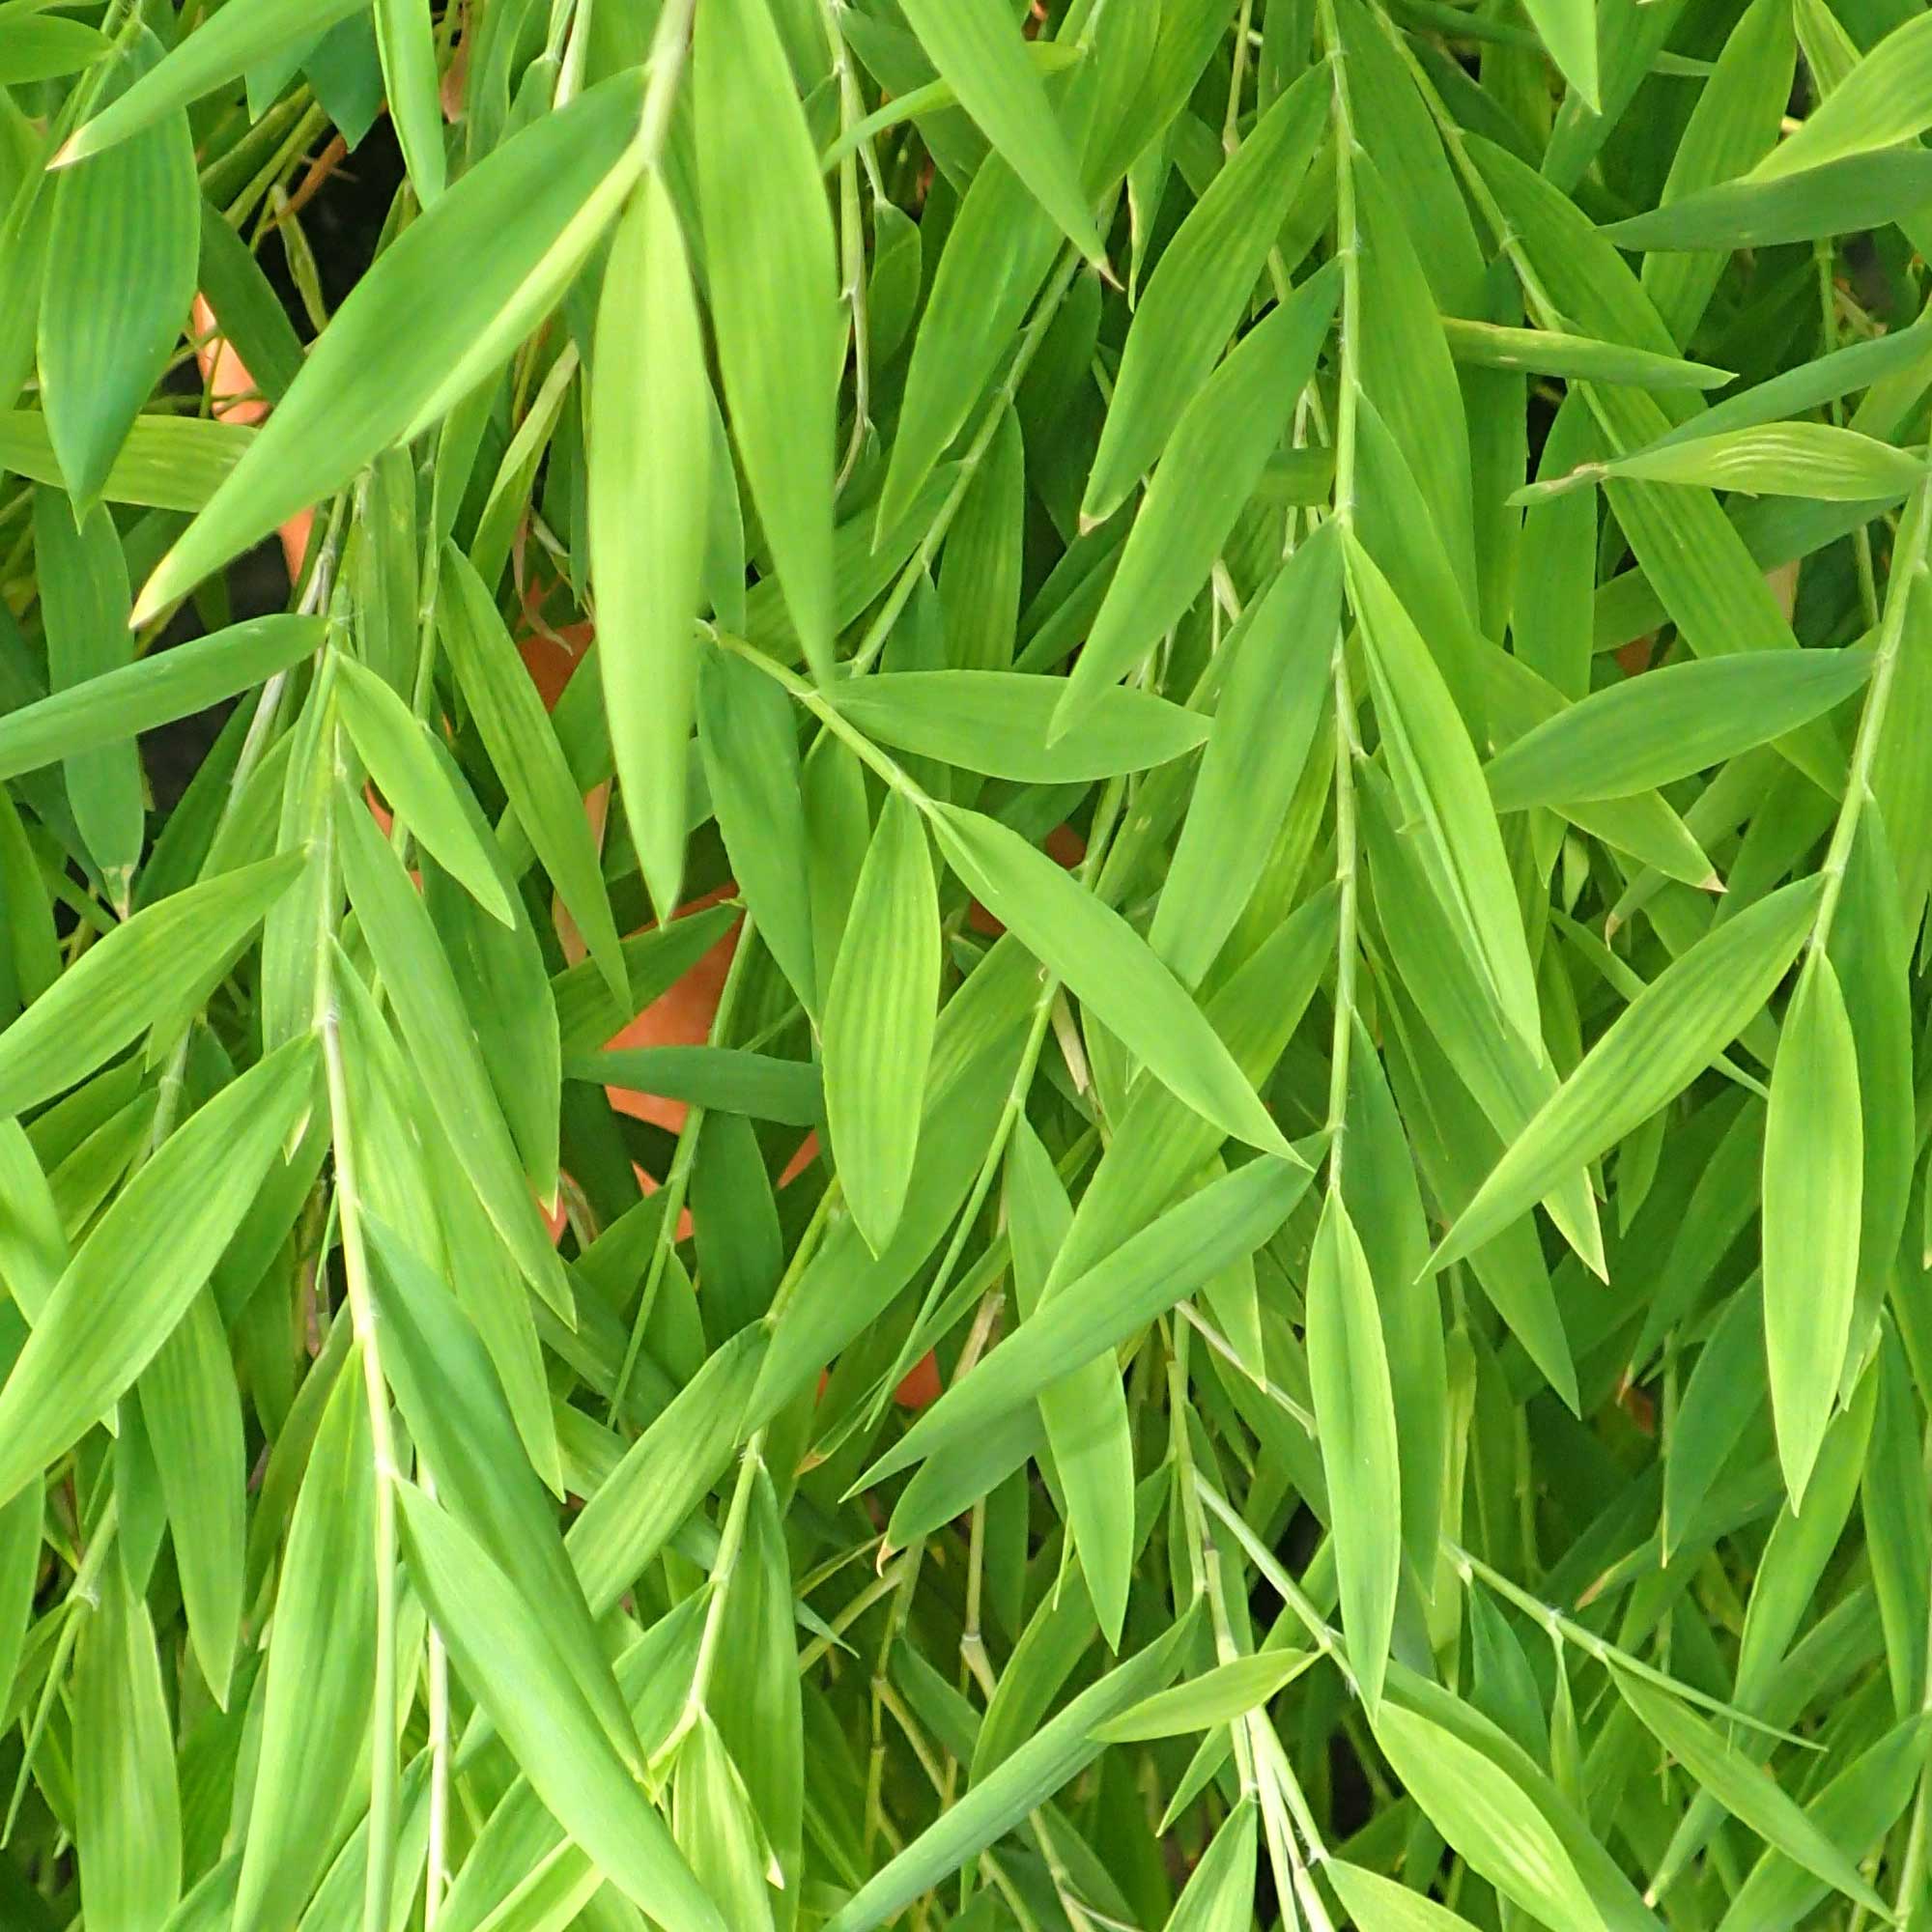 Photograph showing close-up of bright green baby bamboo grass plants.